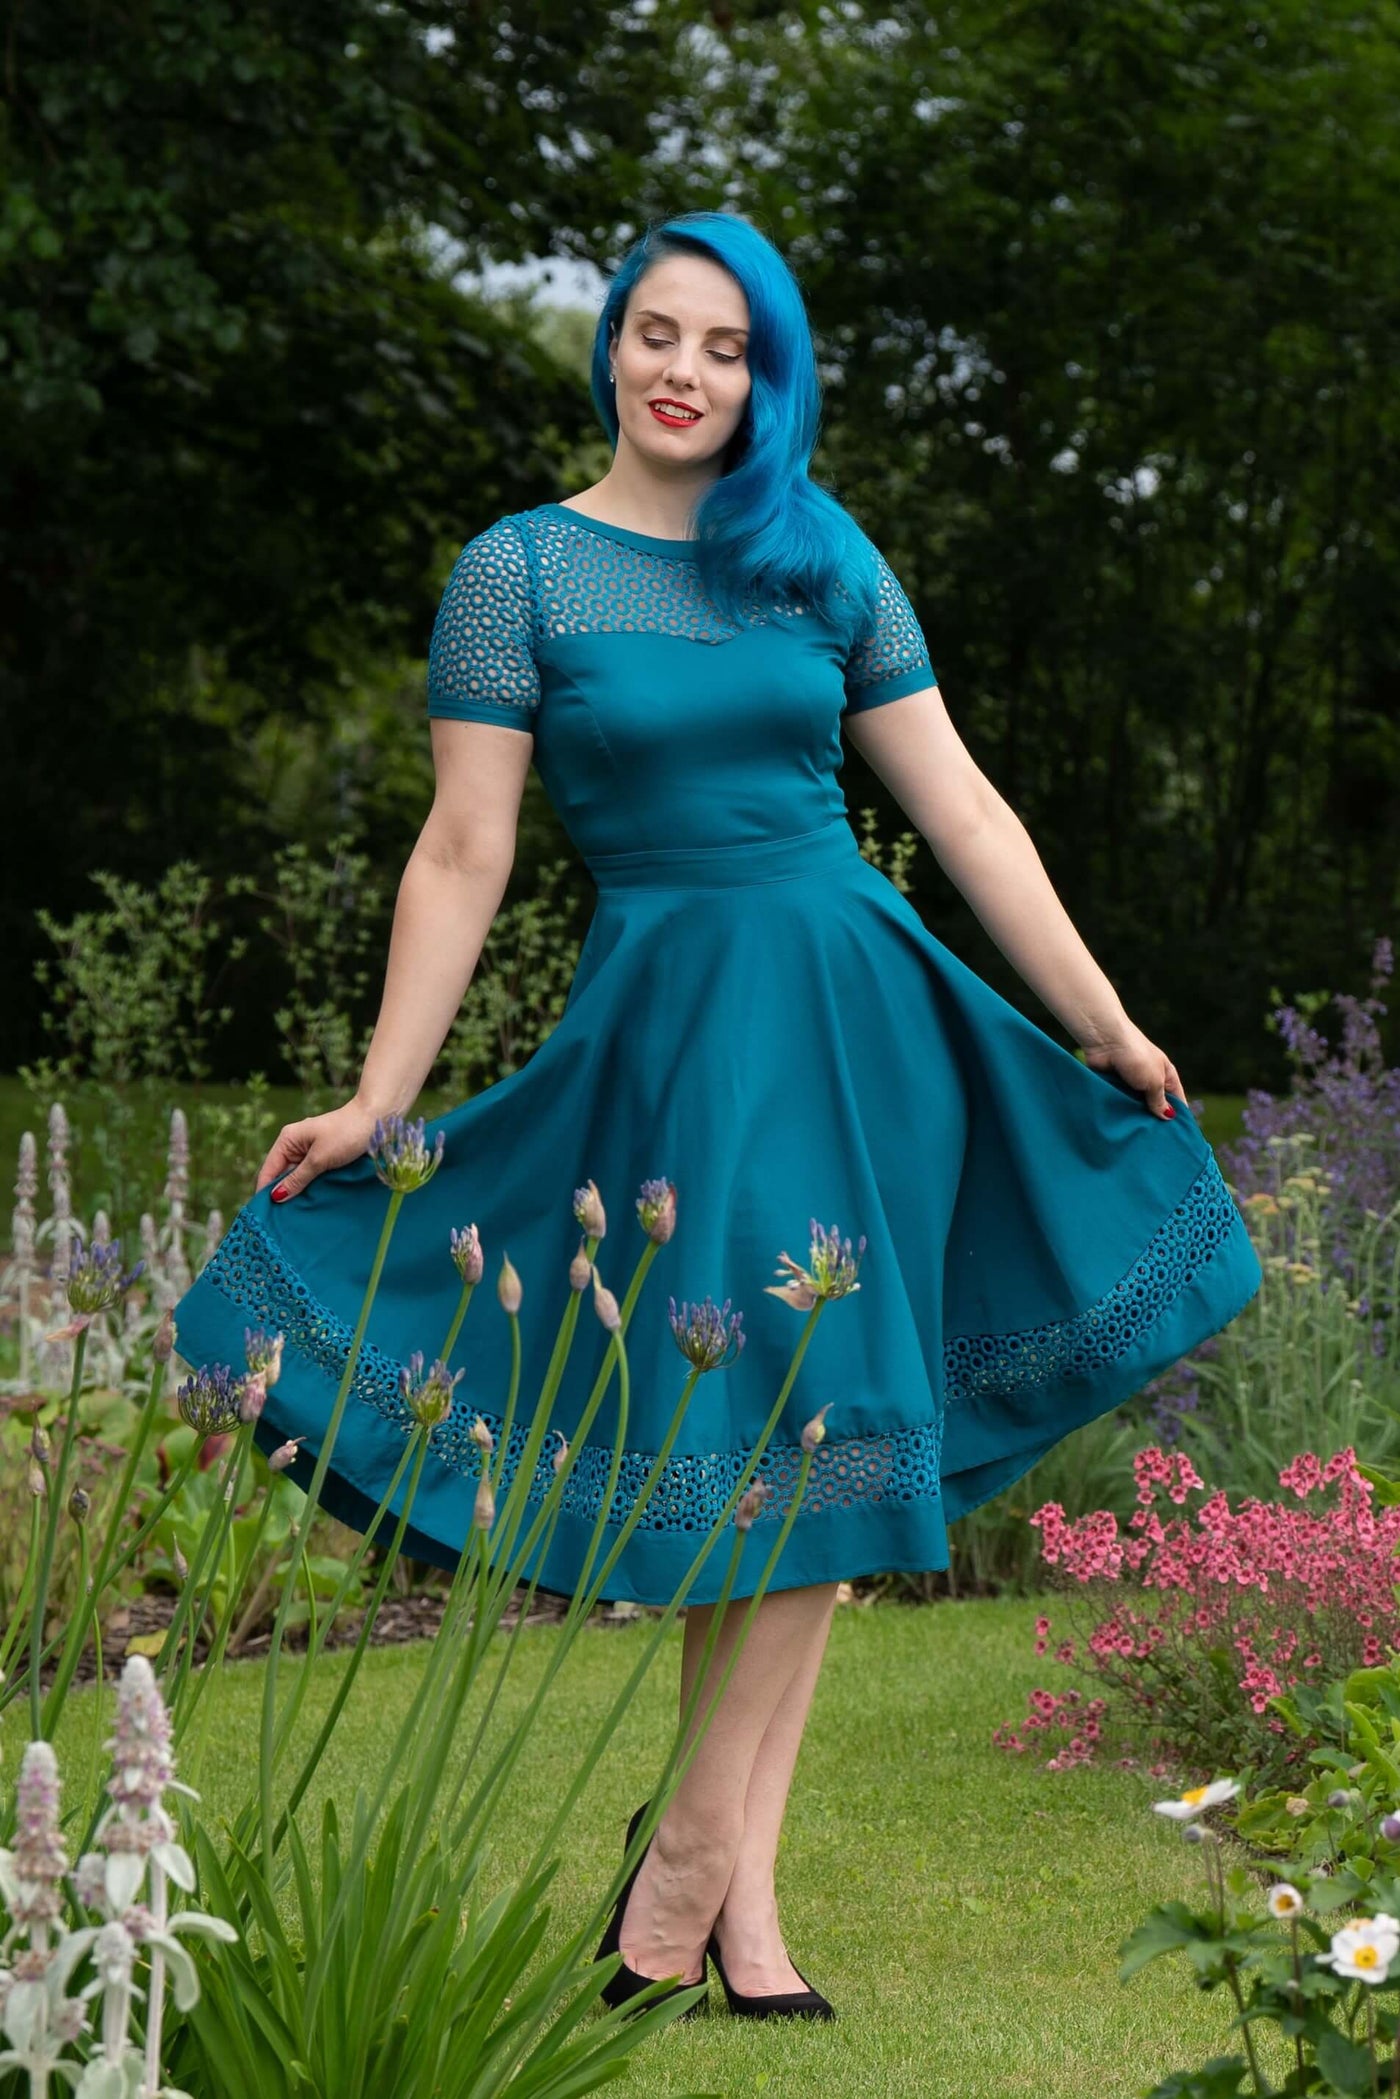 minavonvixen in Crochet Lace Sleeved Occasion Formal Dress in Peacock Blue front view